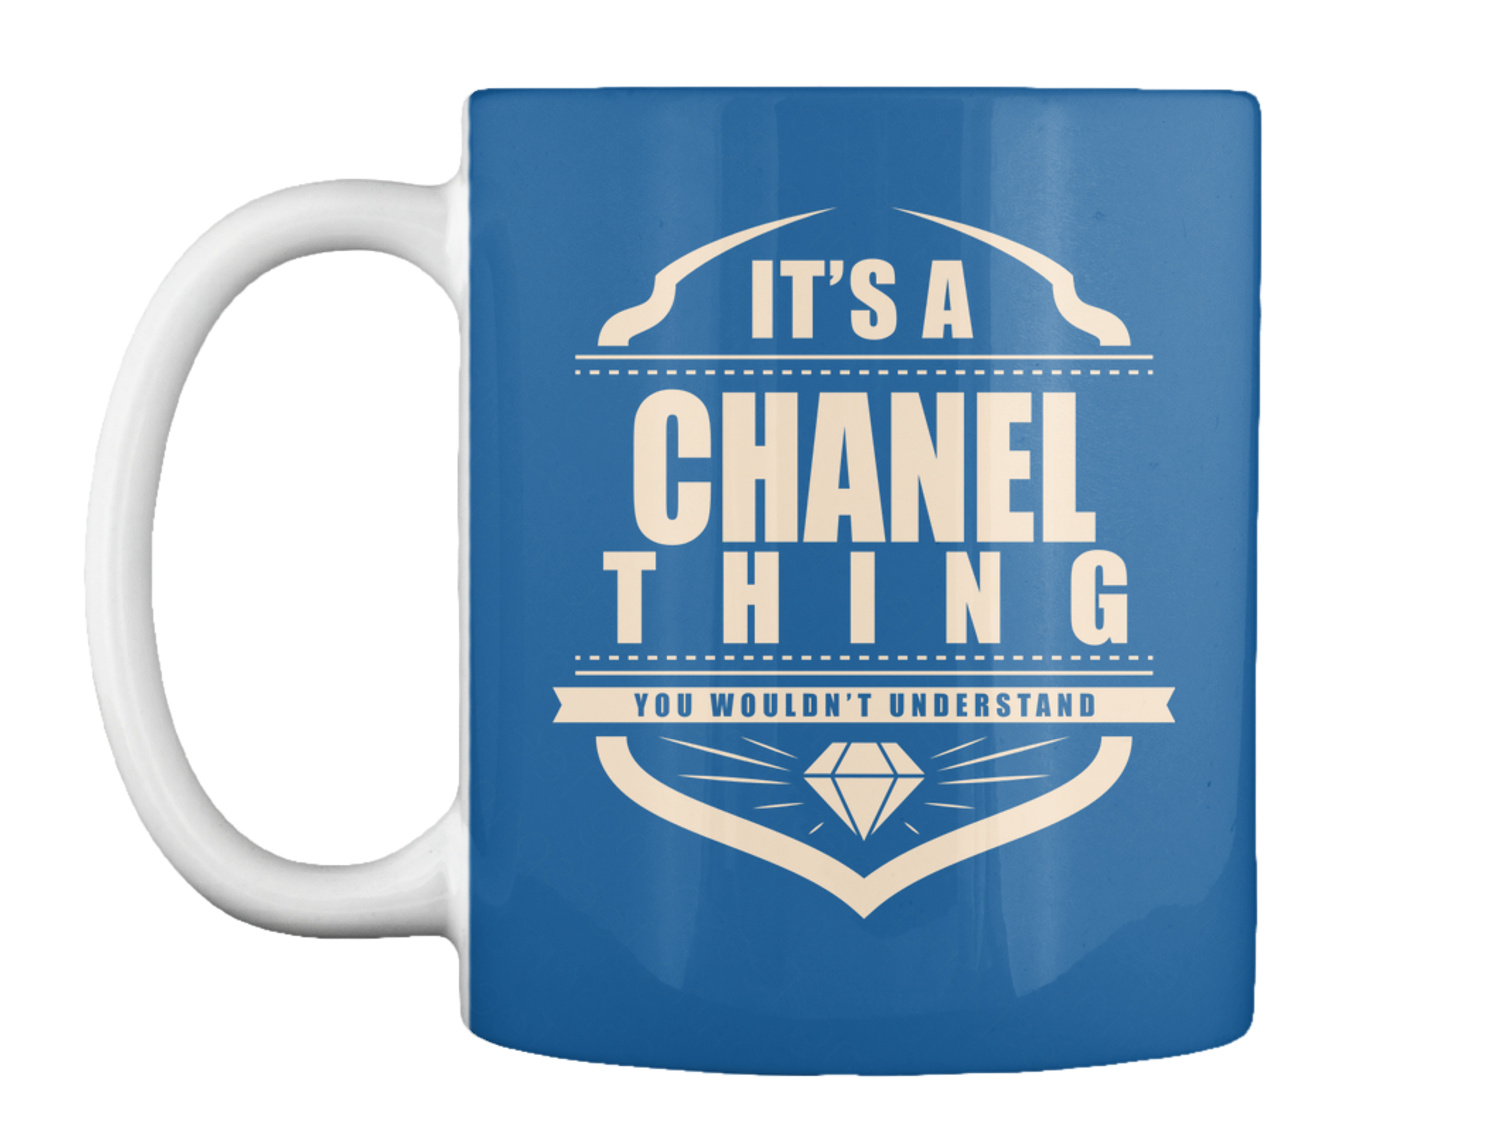 Teespring Chanel Only Chanel Would Understand! Mug - Ceramic | eBay